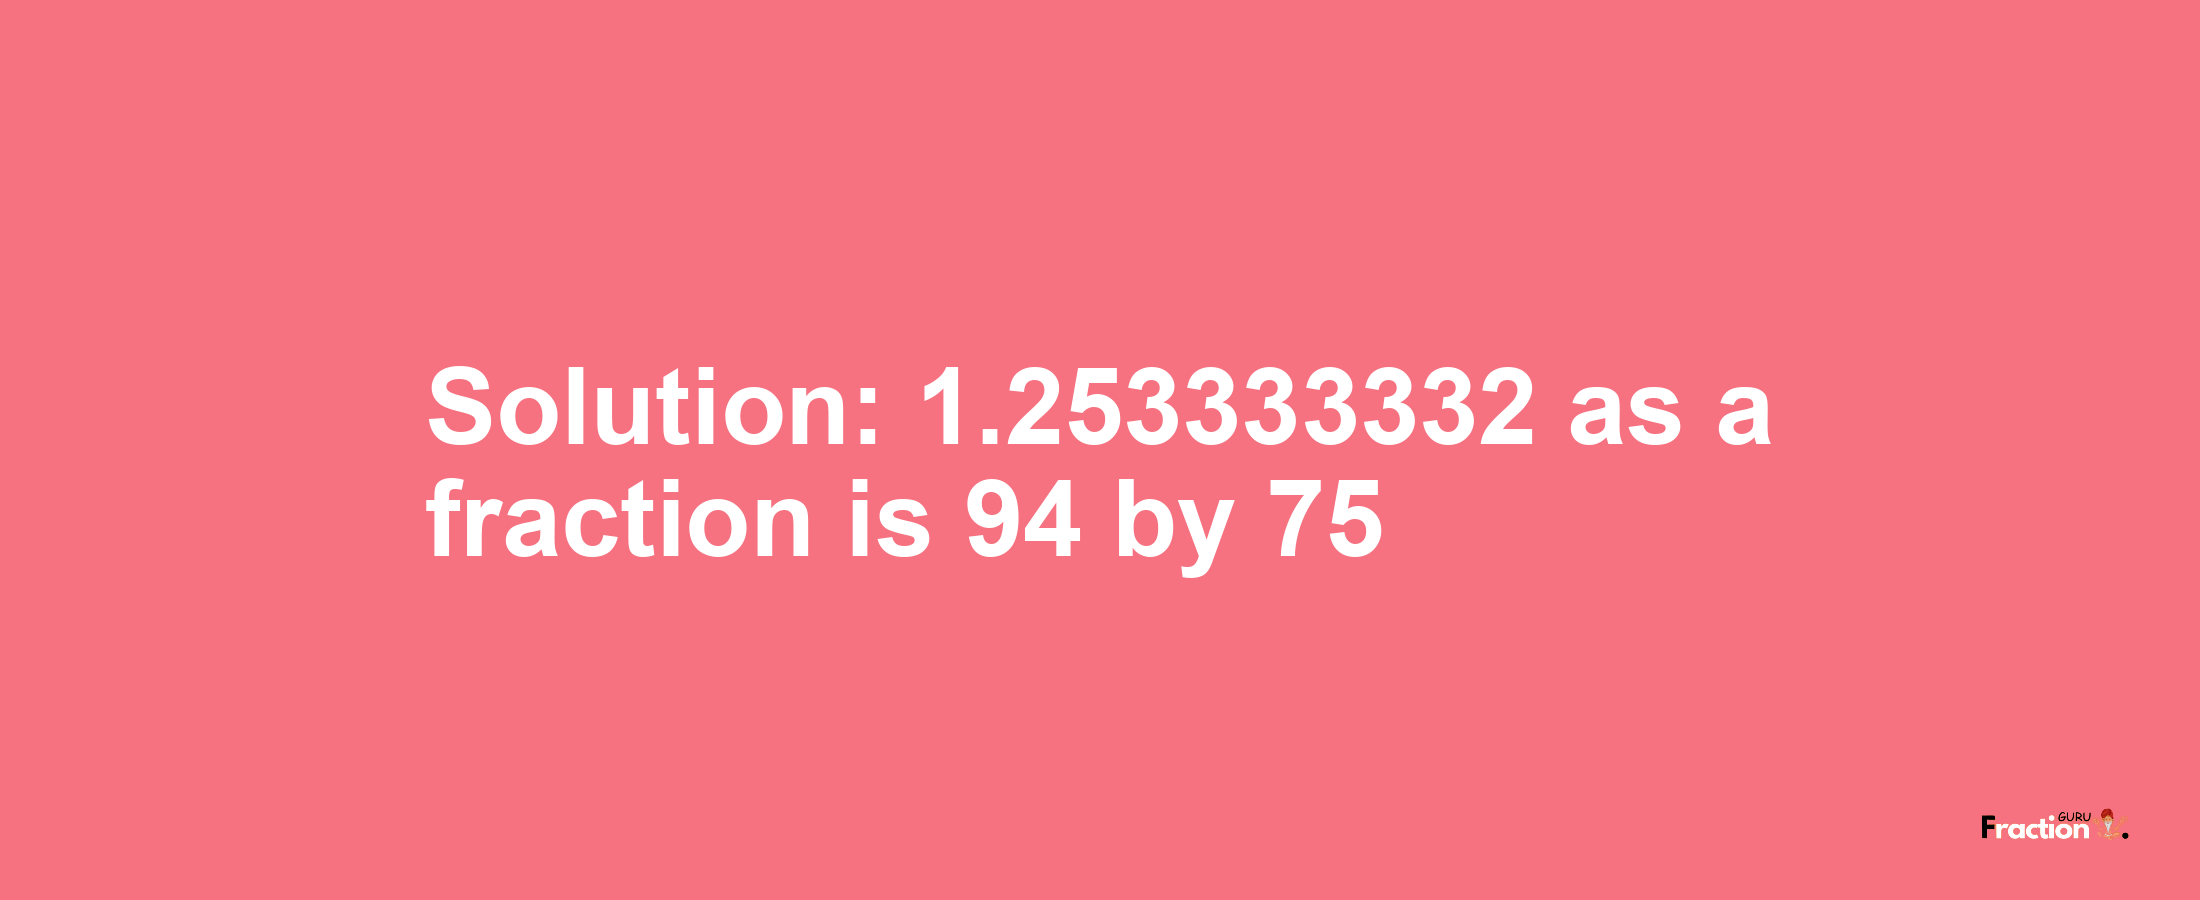 Solution:1.253333332 as a fraction is 94/75